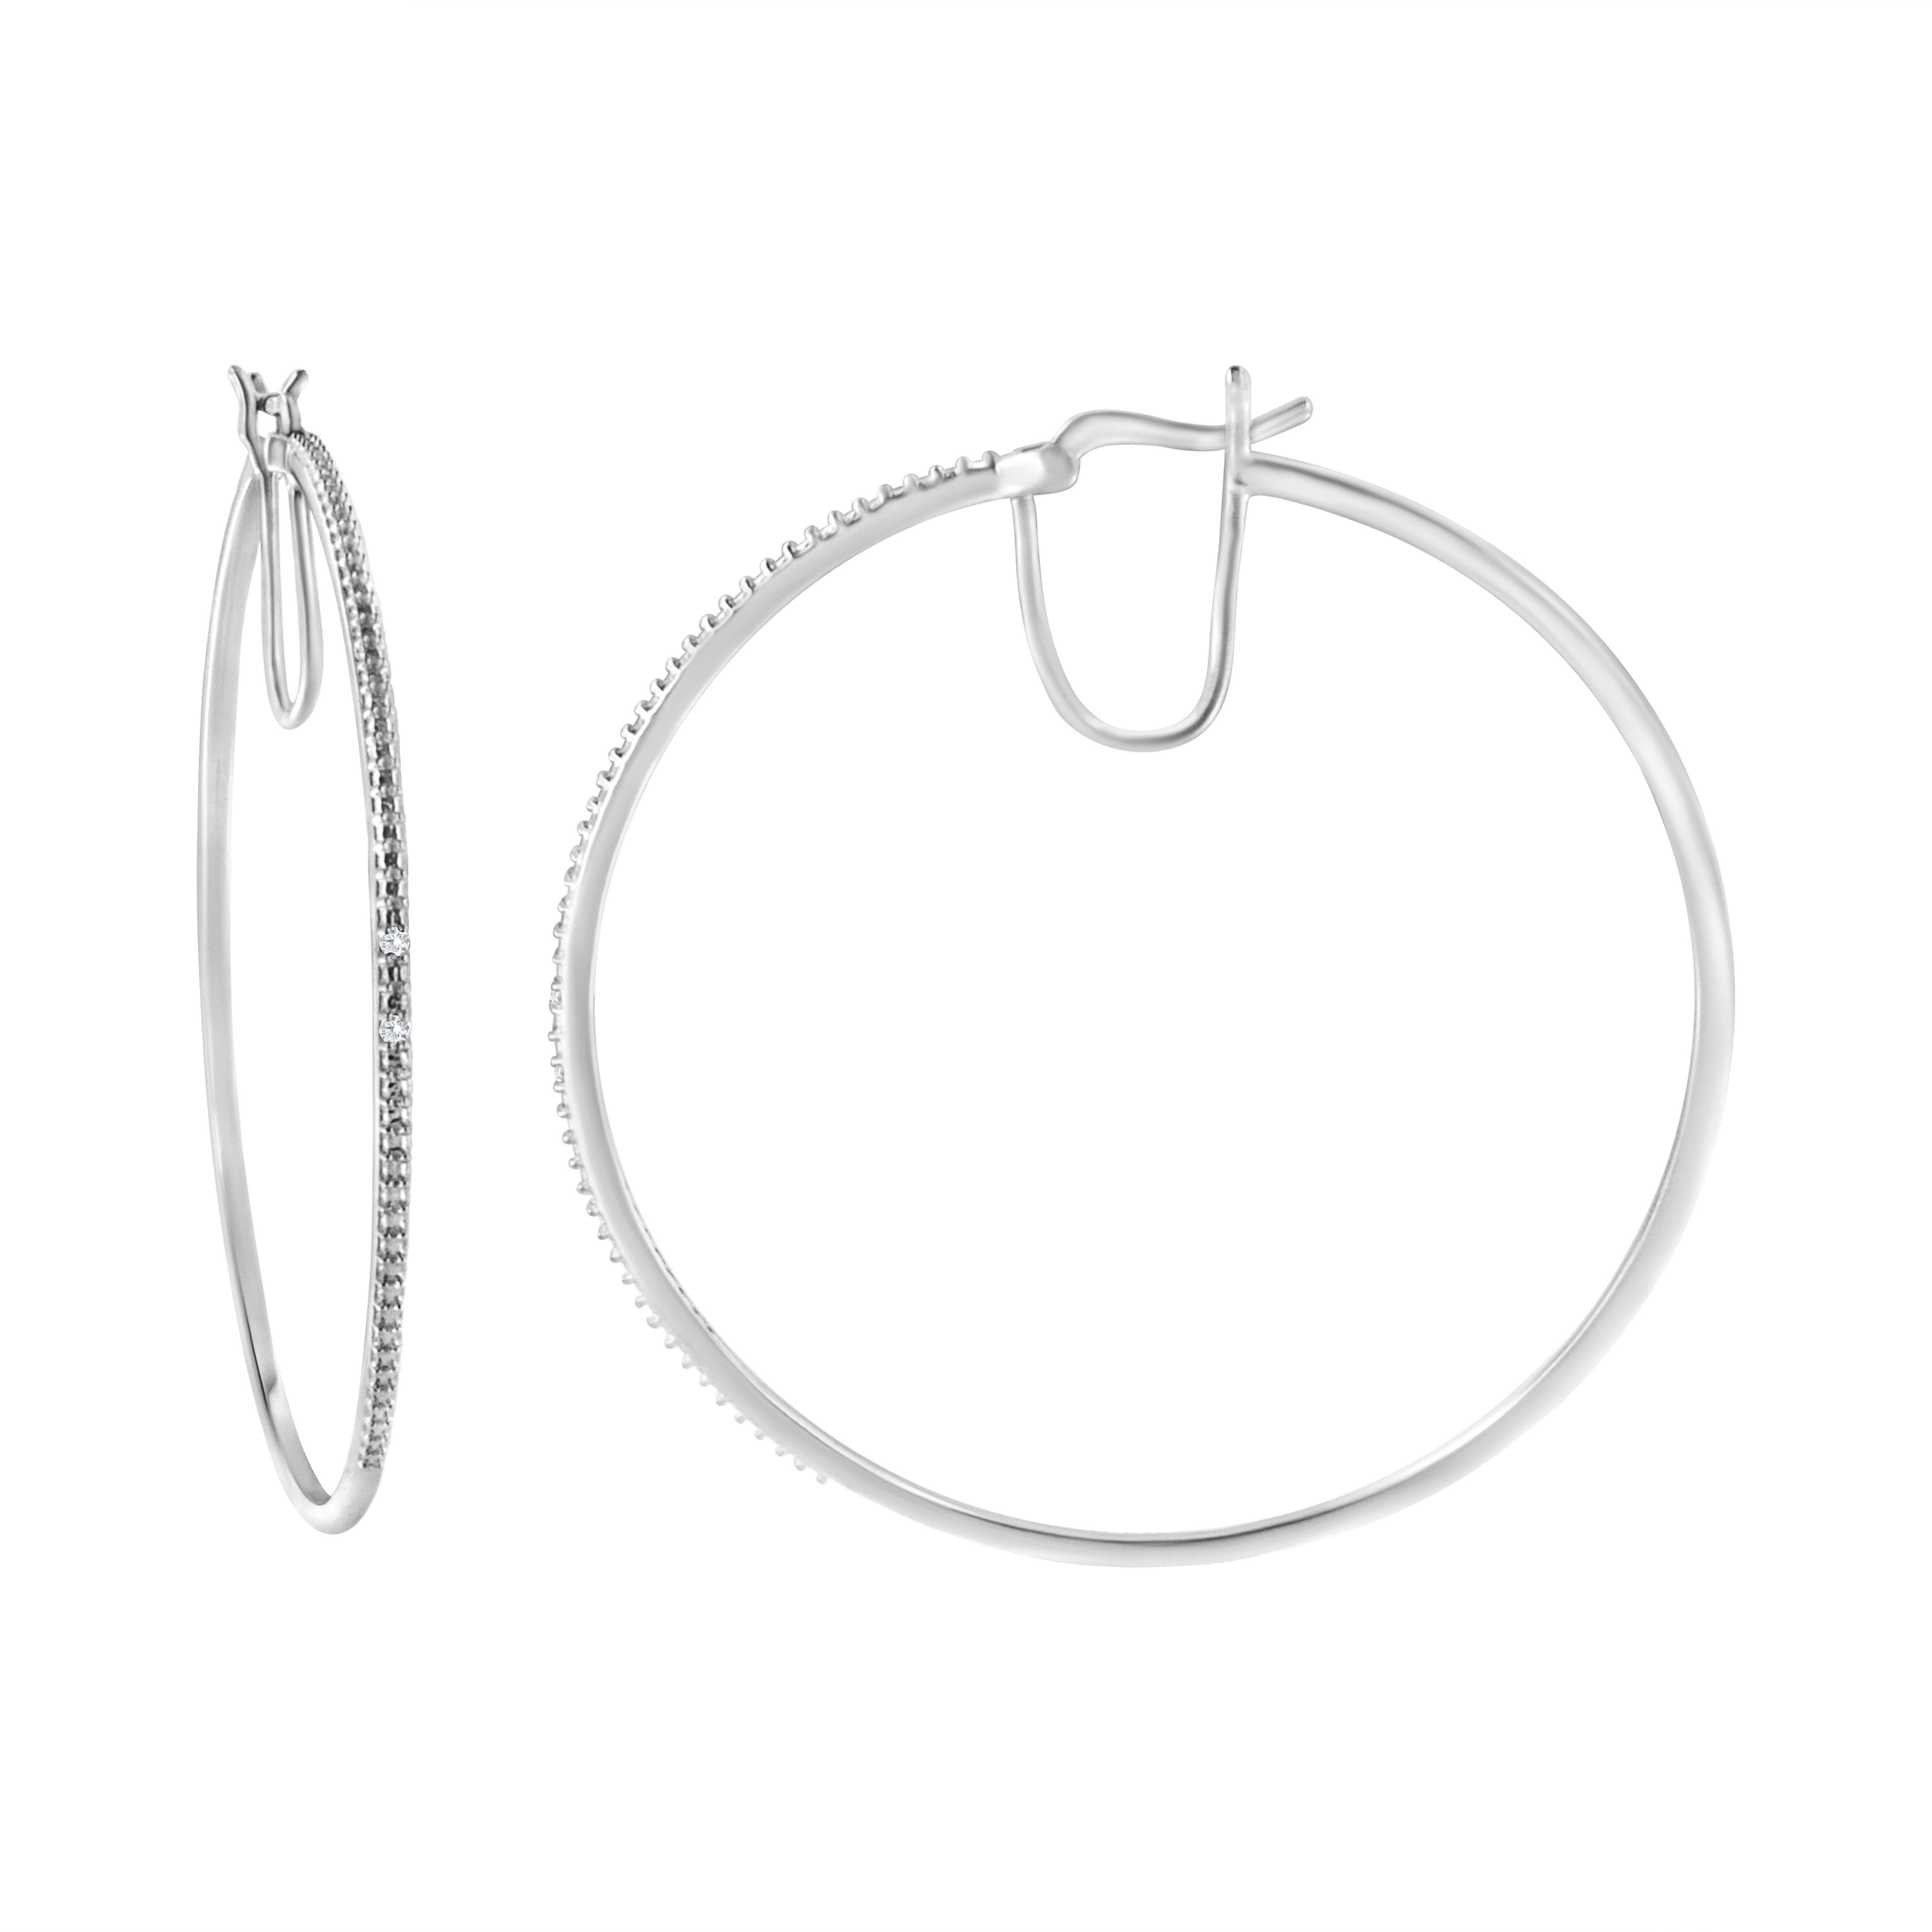 The fabulously sleek style of these sterling silver hoop earrings will complete any outfit and add the perfect amount of sparkle to your day. With a dazzling diamond accent comprised of 4 natural, sparkling diamonds, this diamond hoop design gives